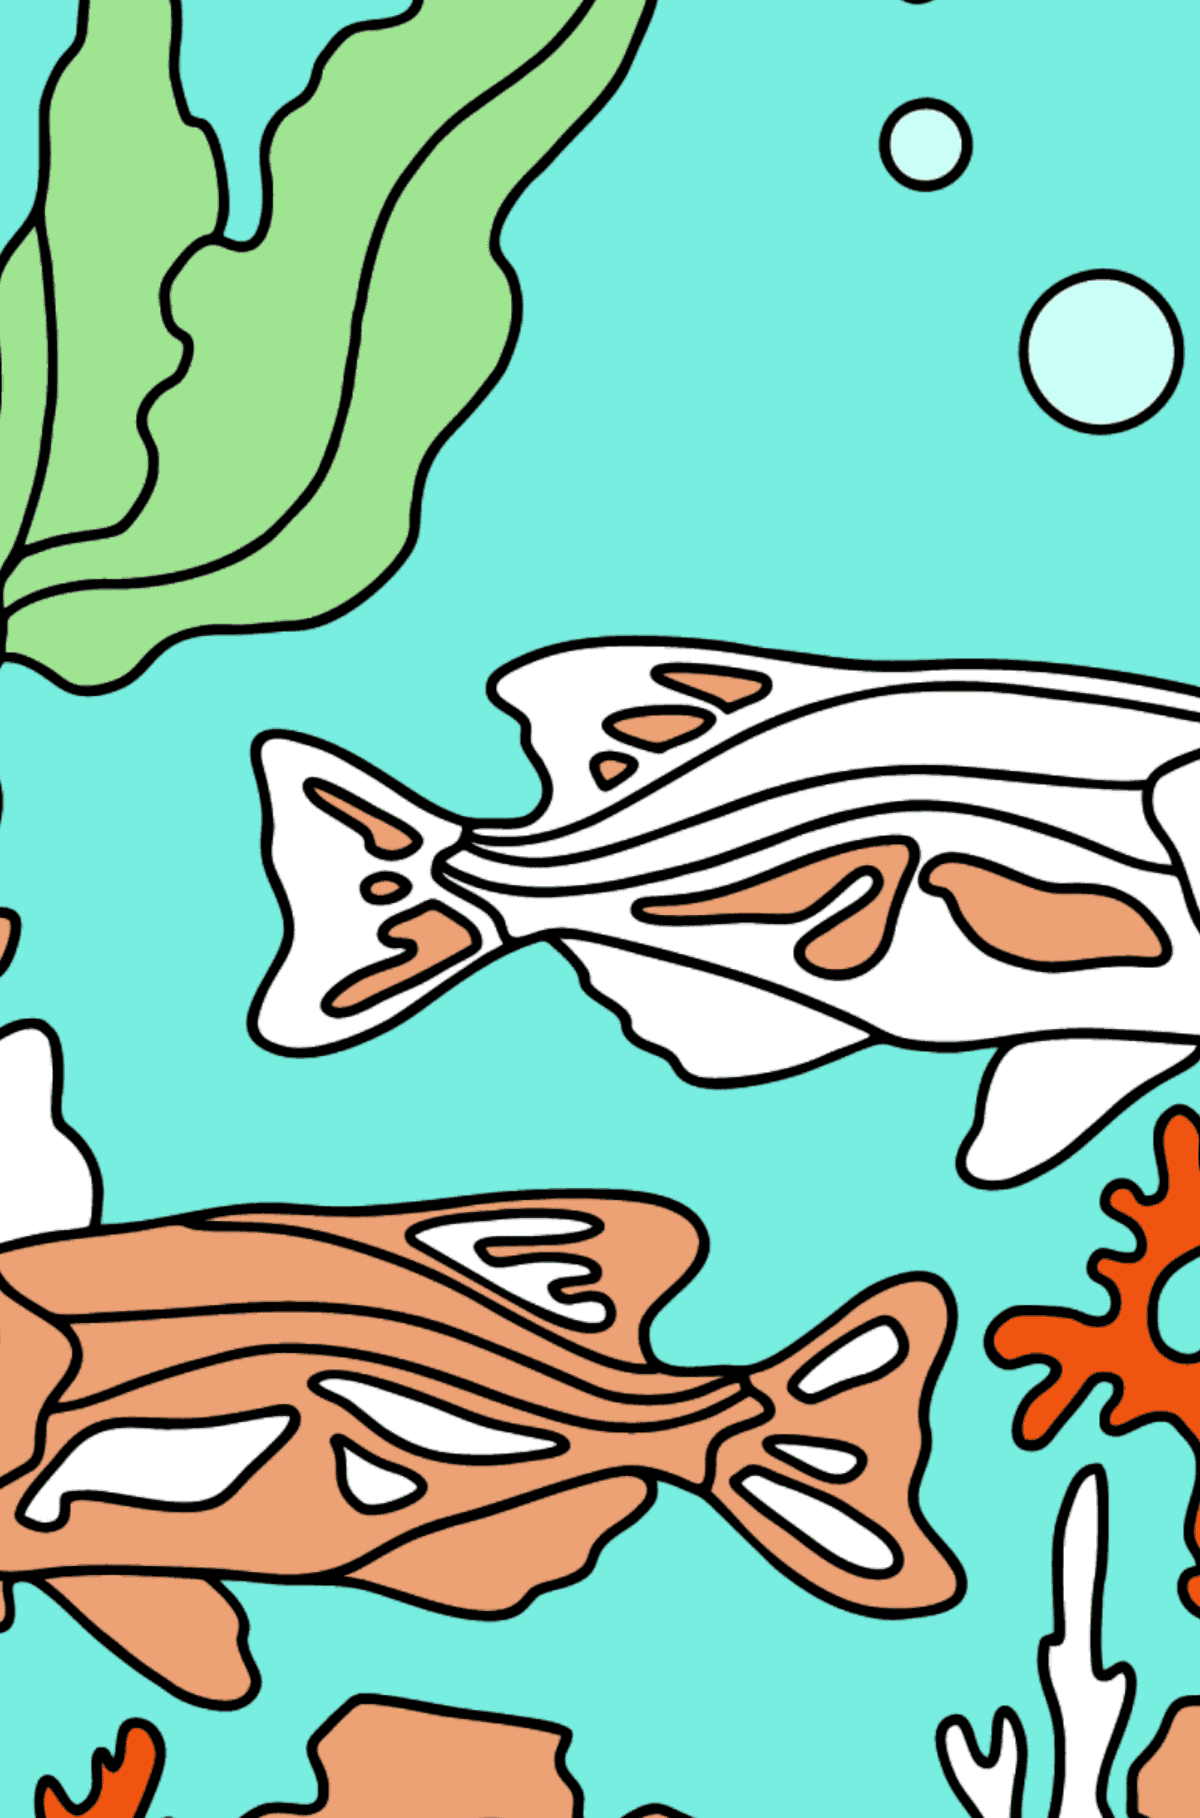 Coloring Page - Fish are Swimming - Coloring by Symbols and Geometric Shapes for Kids